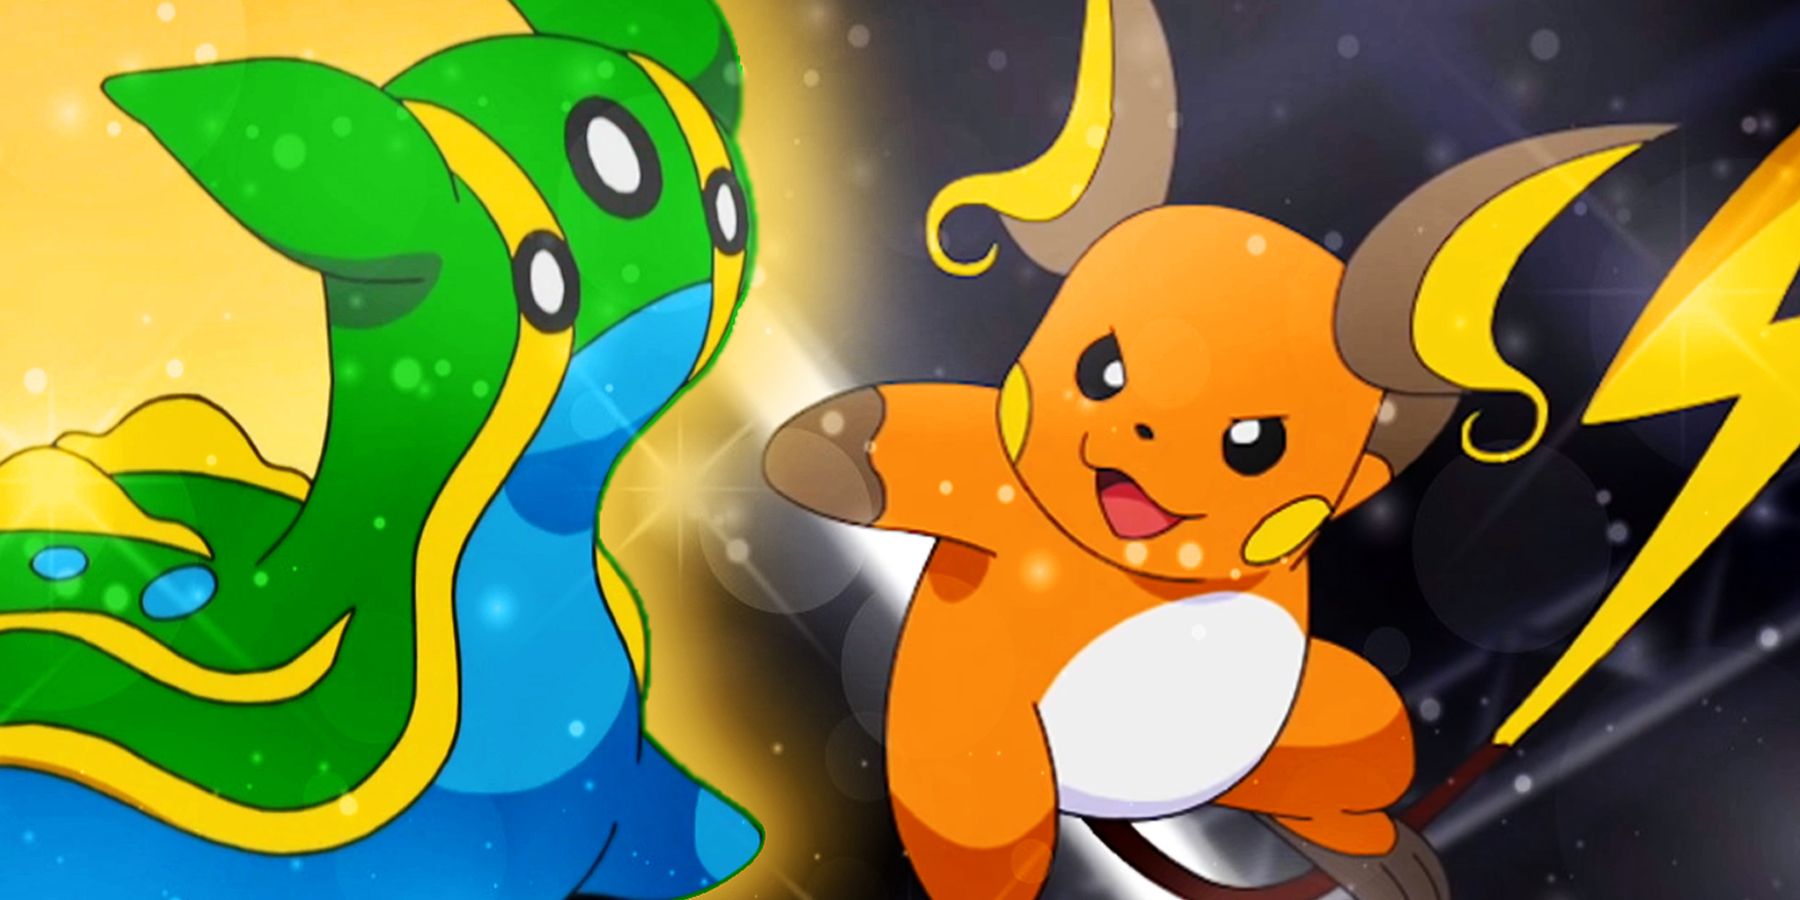 10 Well-Rounded Pokémon That Can Fit On Any Team